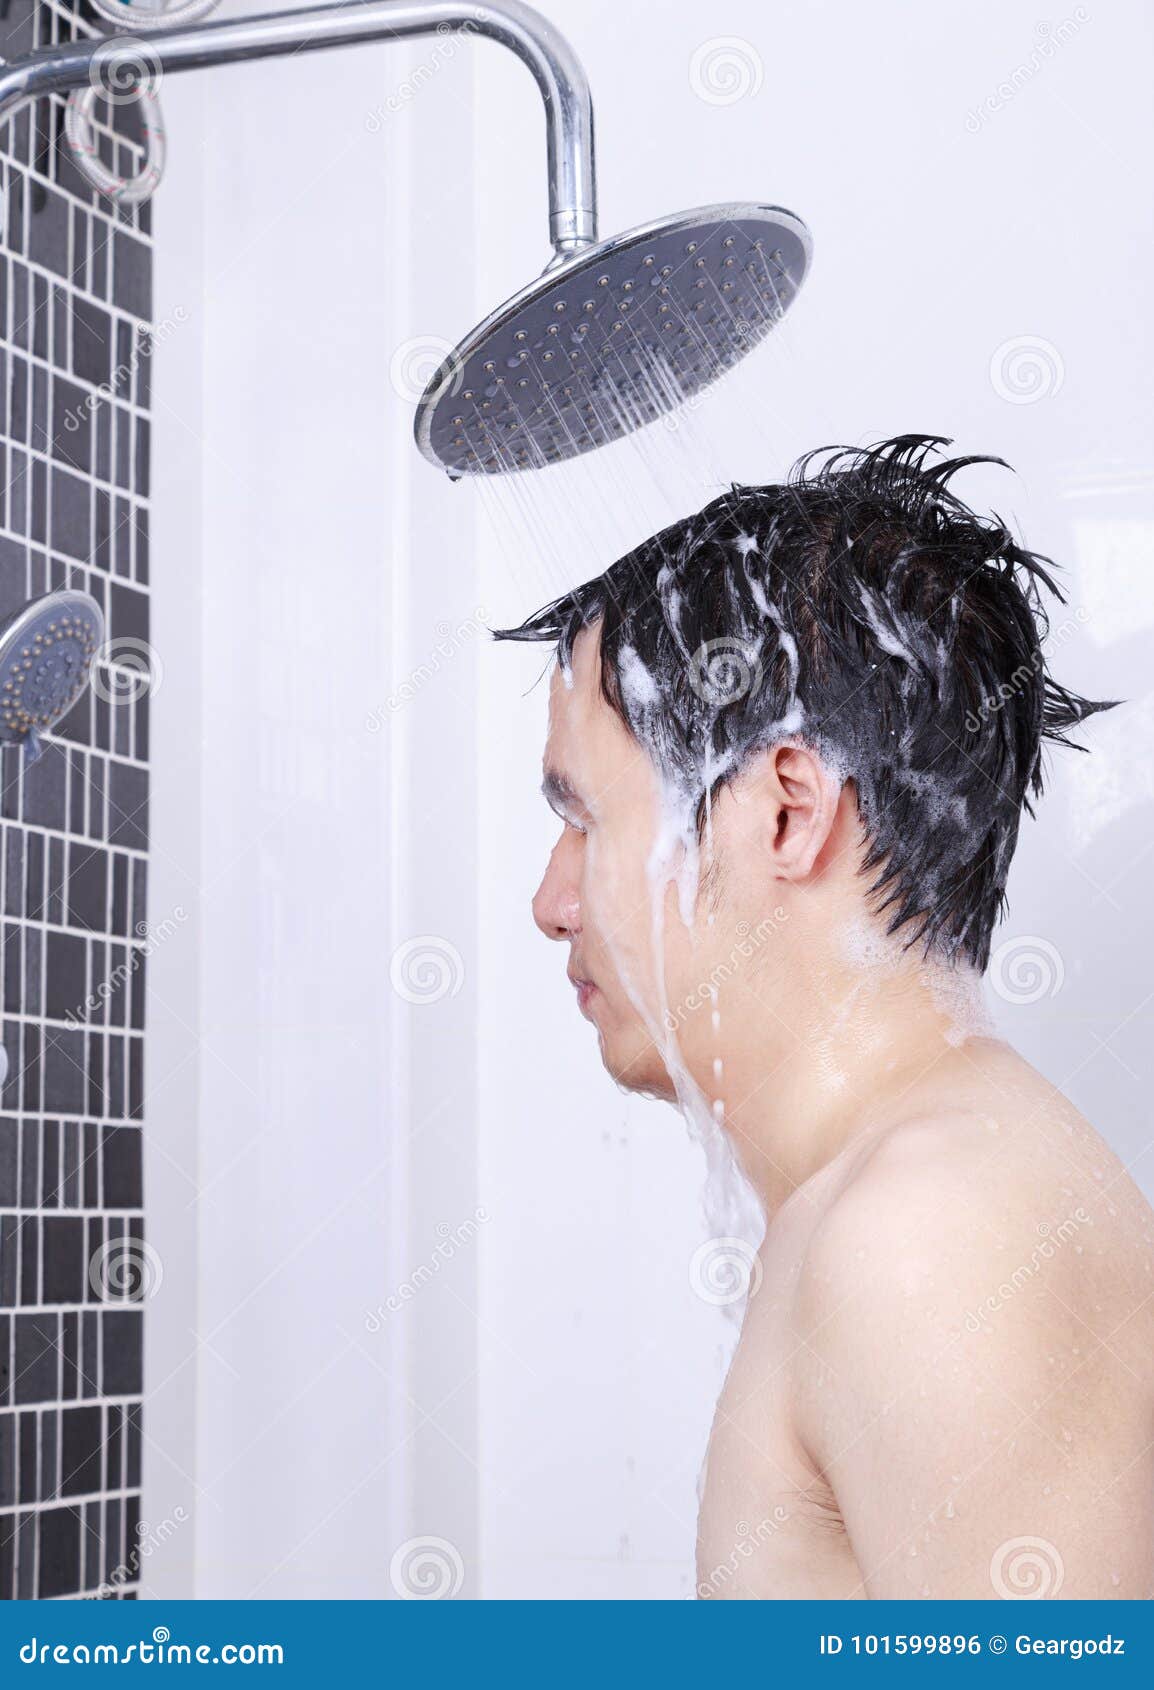 Come a shower. Take a Shower. Мужчины красивые волосы мытье голова. A man Washes in the Shower. Taking a shower3.